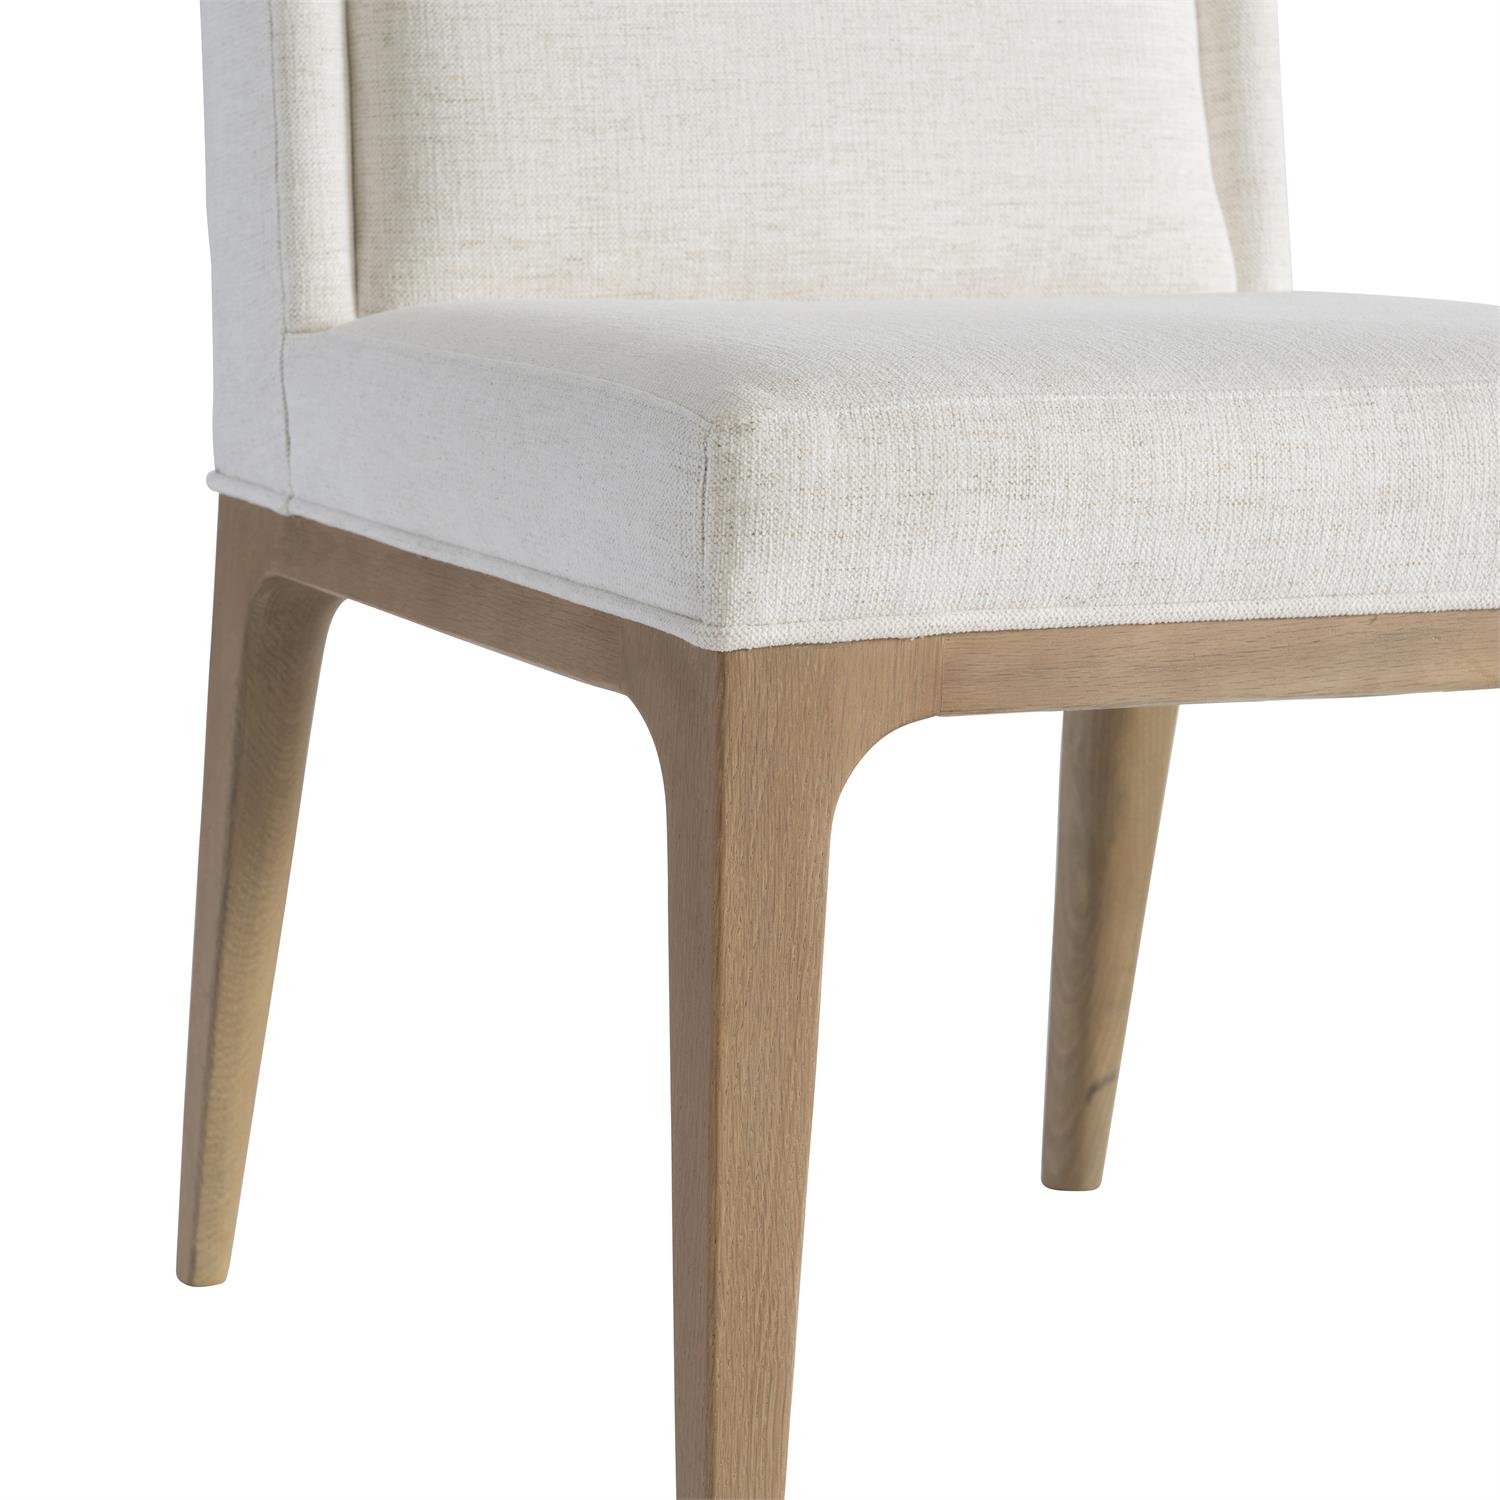 Modulum Dining Chair - Avenue Design high end furniture in Montreal